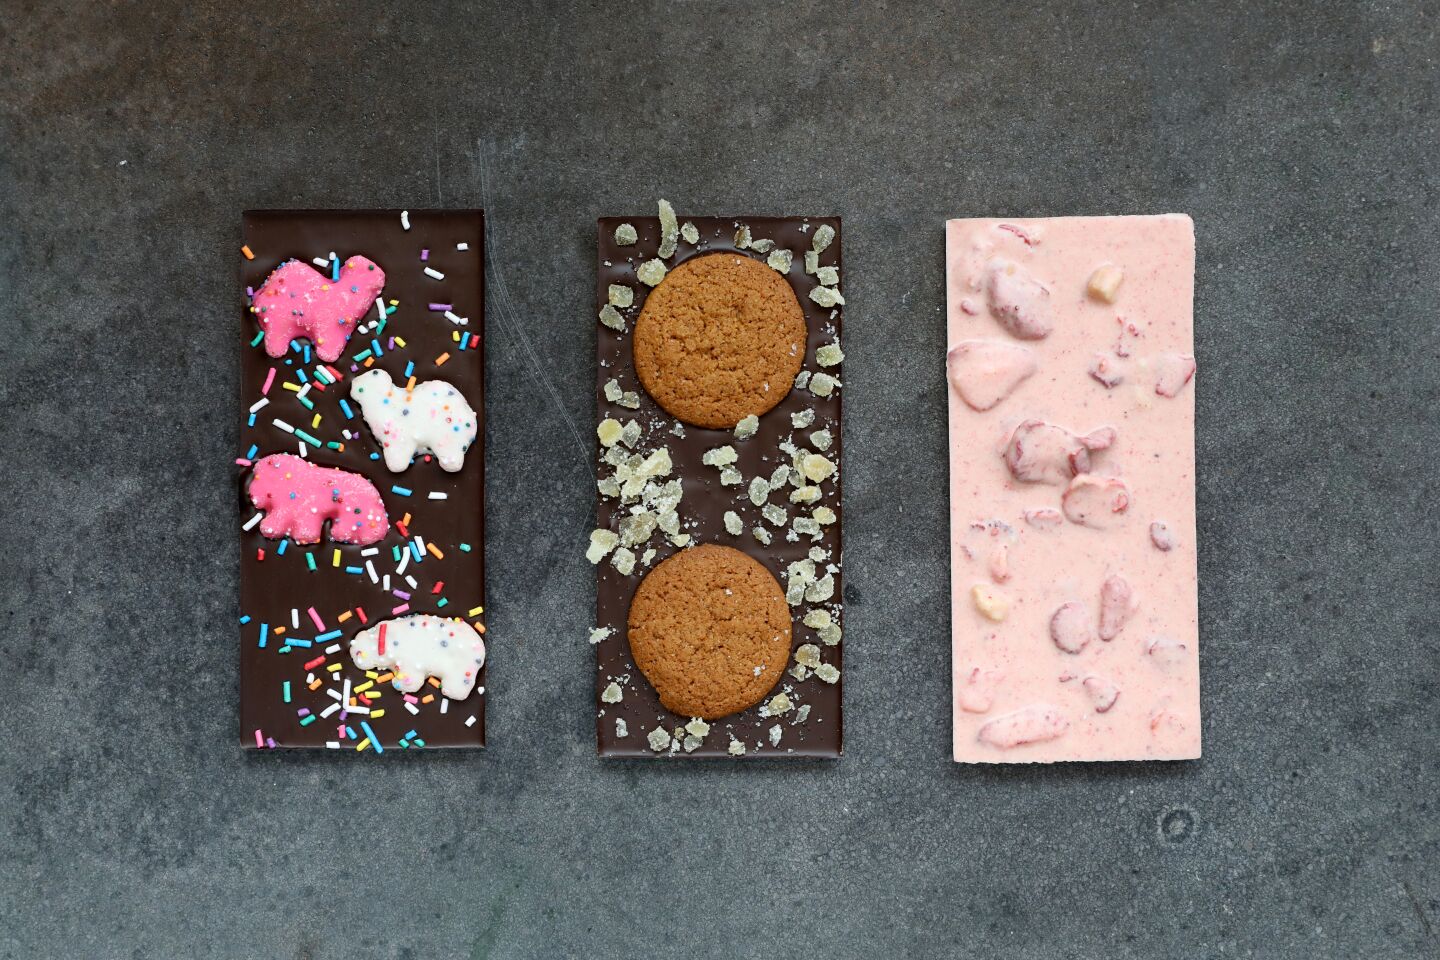 Pink Elephants, Ginger Bread and Strawberry Shortcake chocolate bars